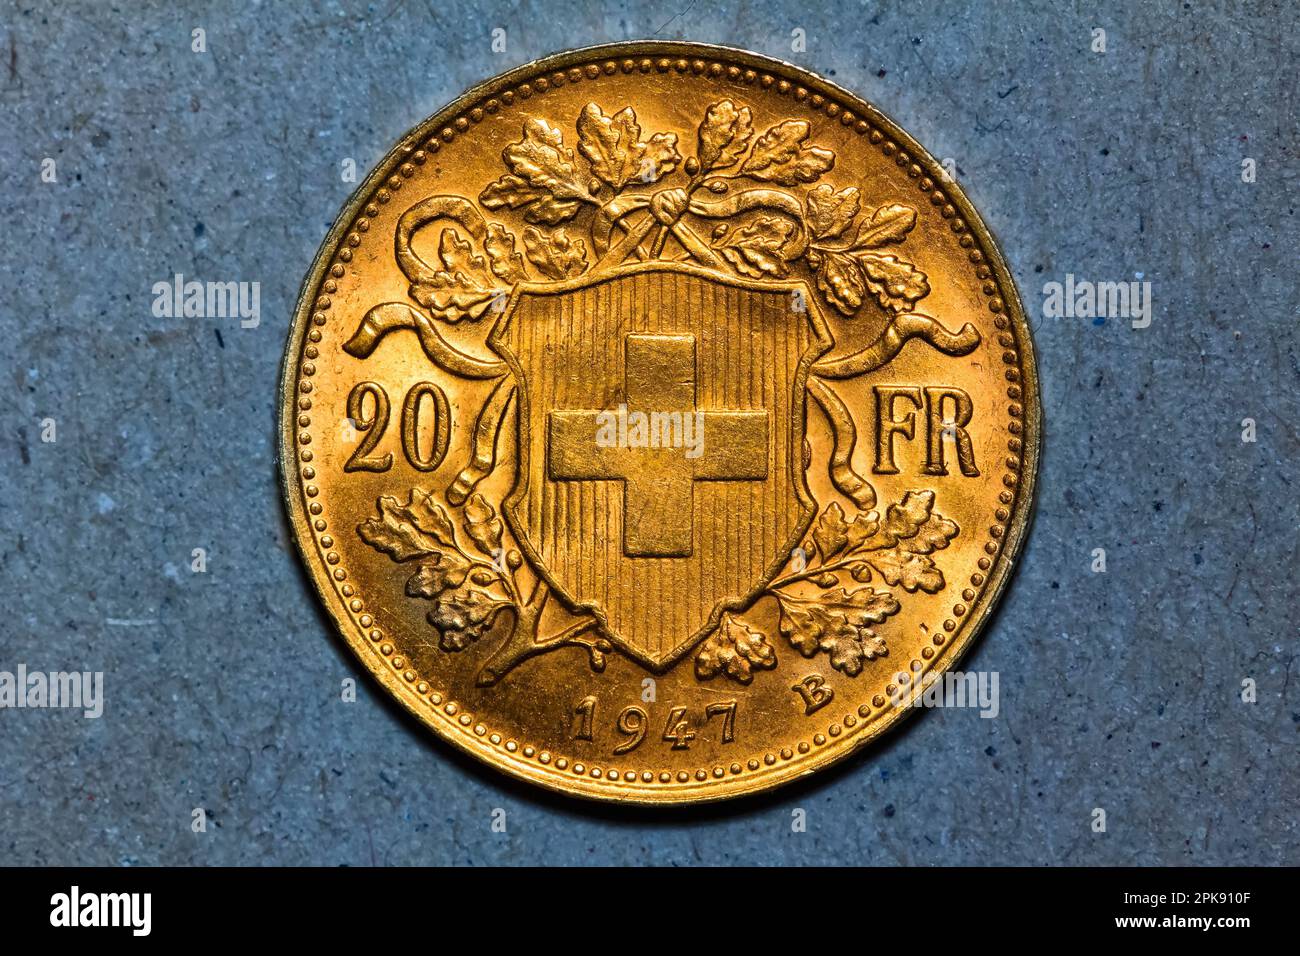 Swiss 20 Francs Vreneli gold coin from 1947 showing Helvetia Stock Photo